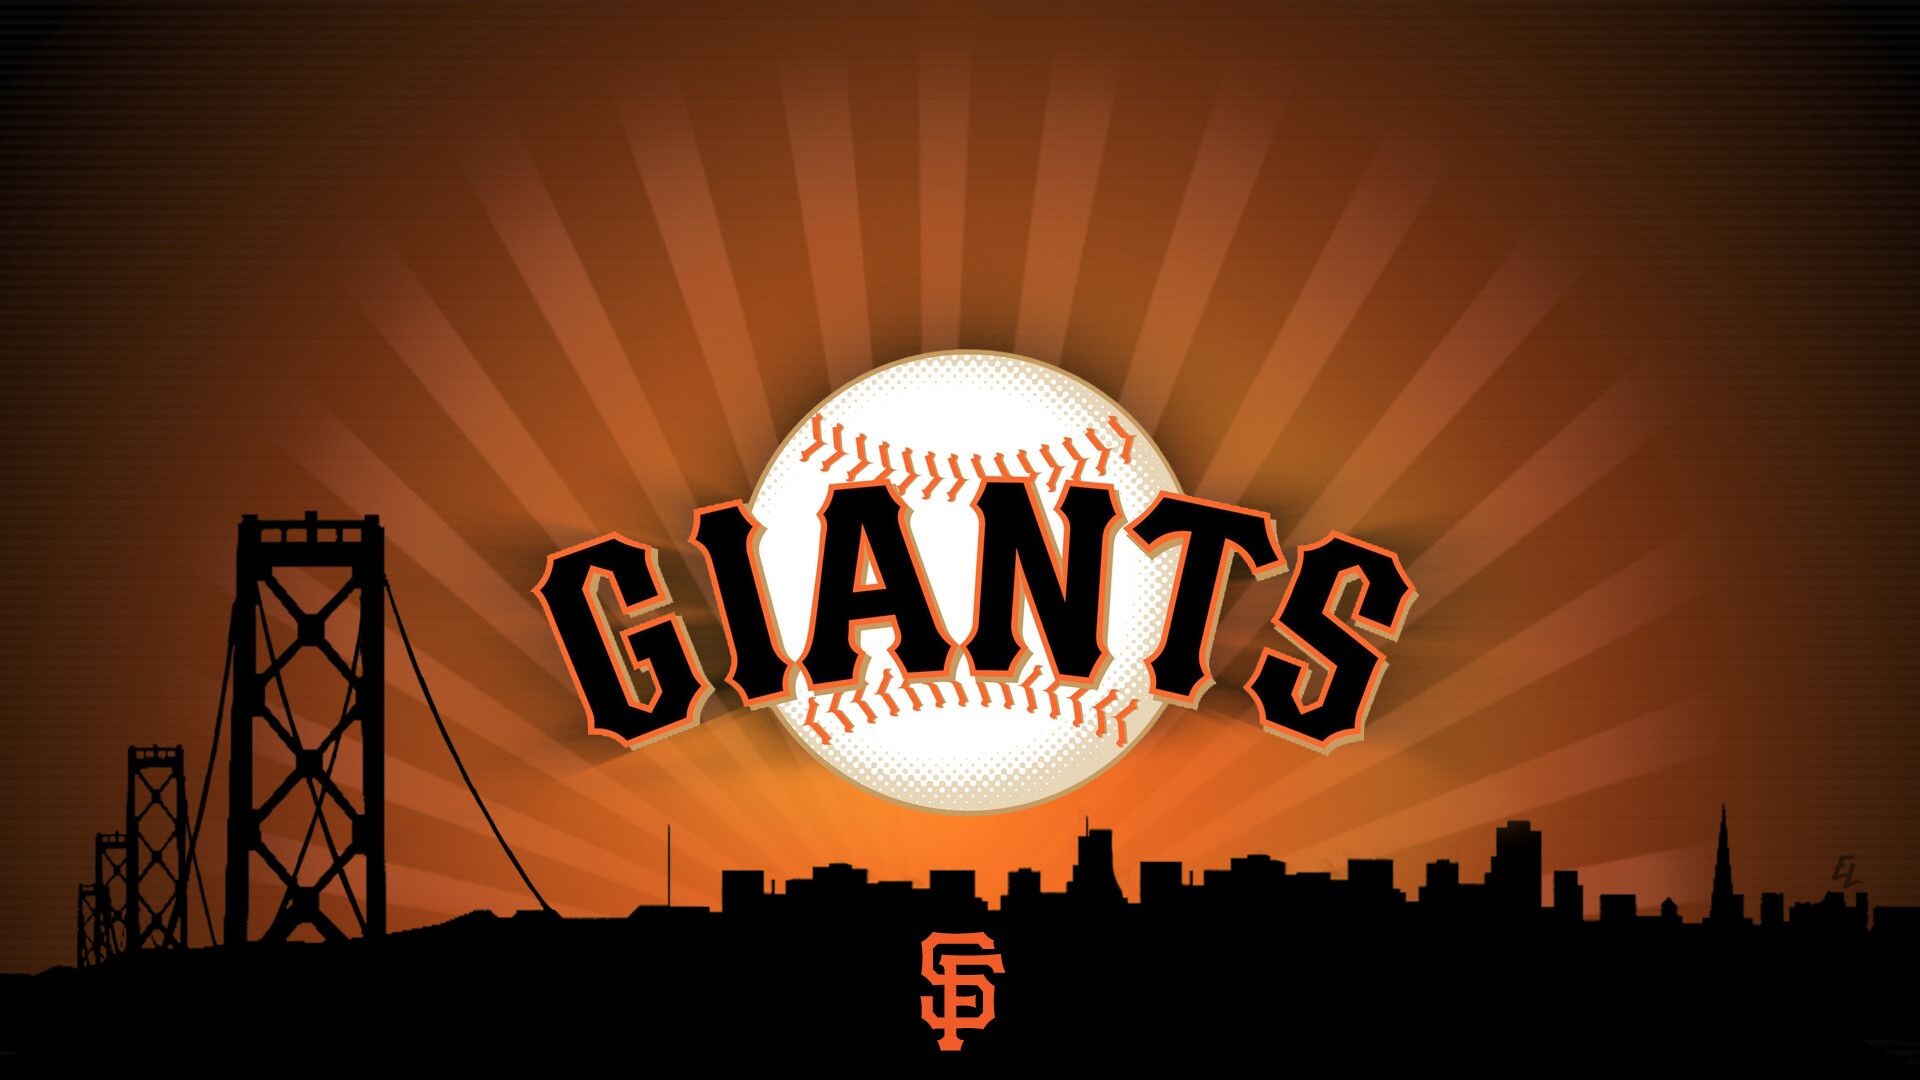 San Francisco Giants: The team played home games at the Polo Grounds in Upper Manhattan. 1920x1080 Full HD Wallpaper.